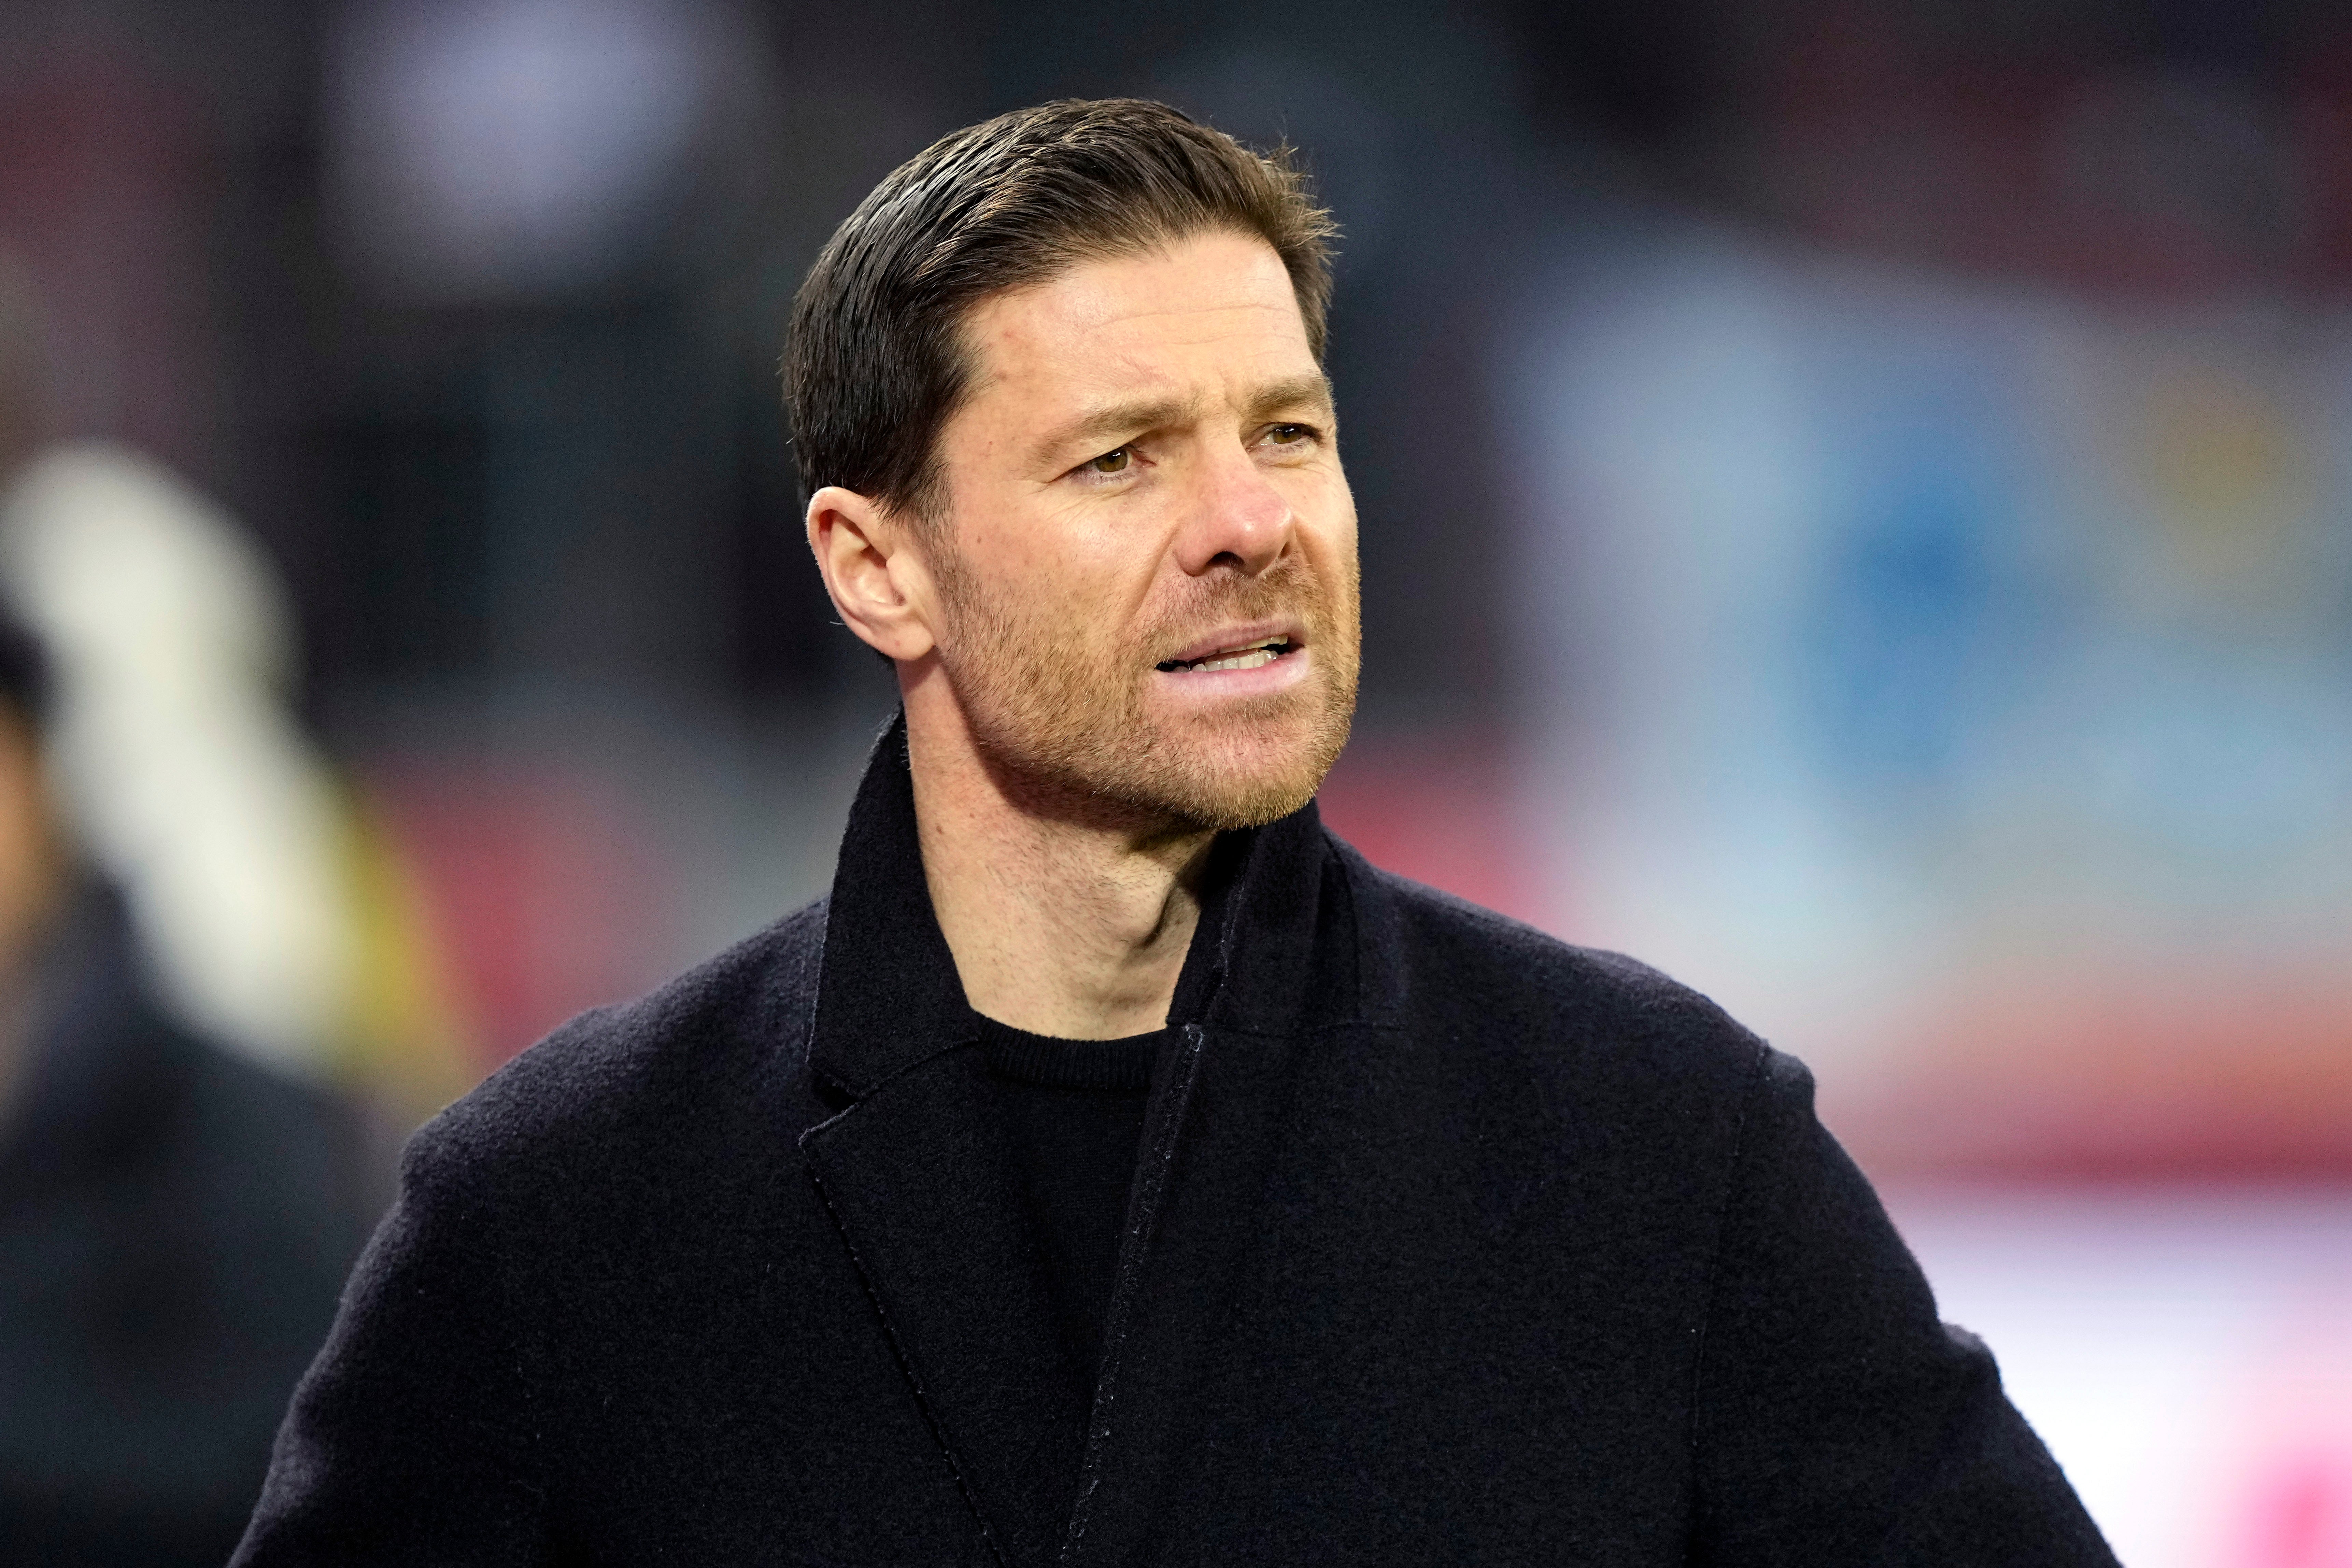 Xabi Alonso has done well as manager of Bayer Leverkusen